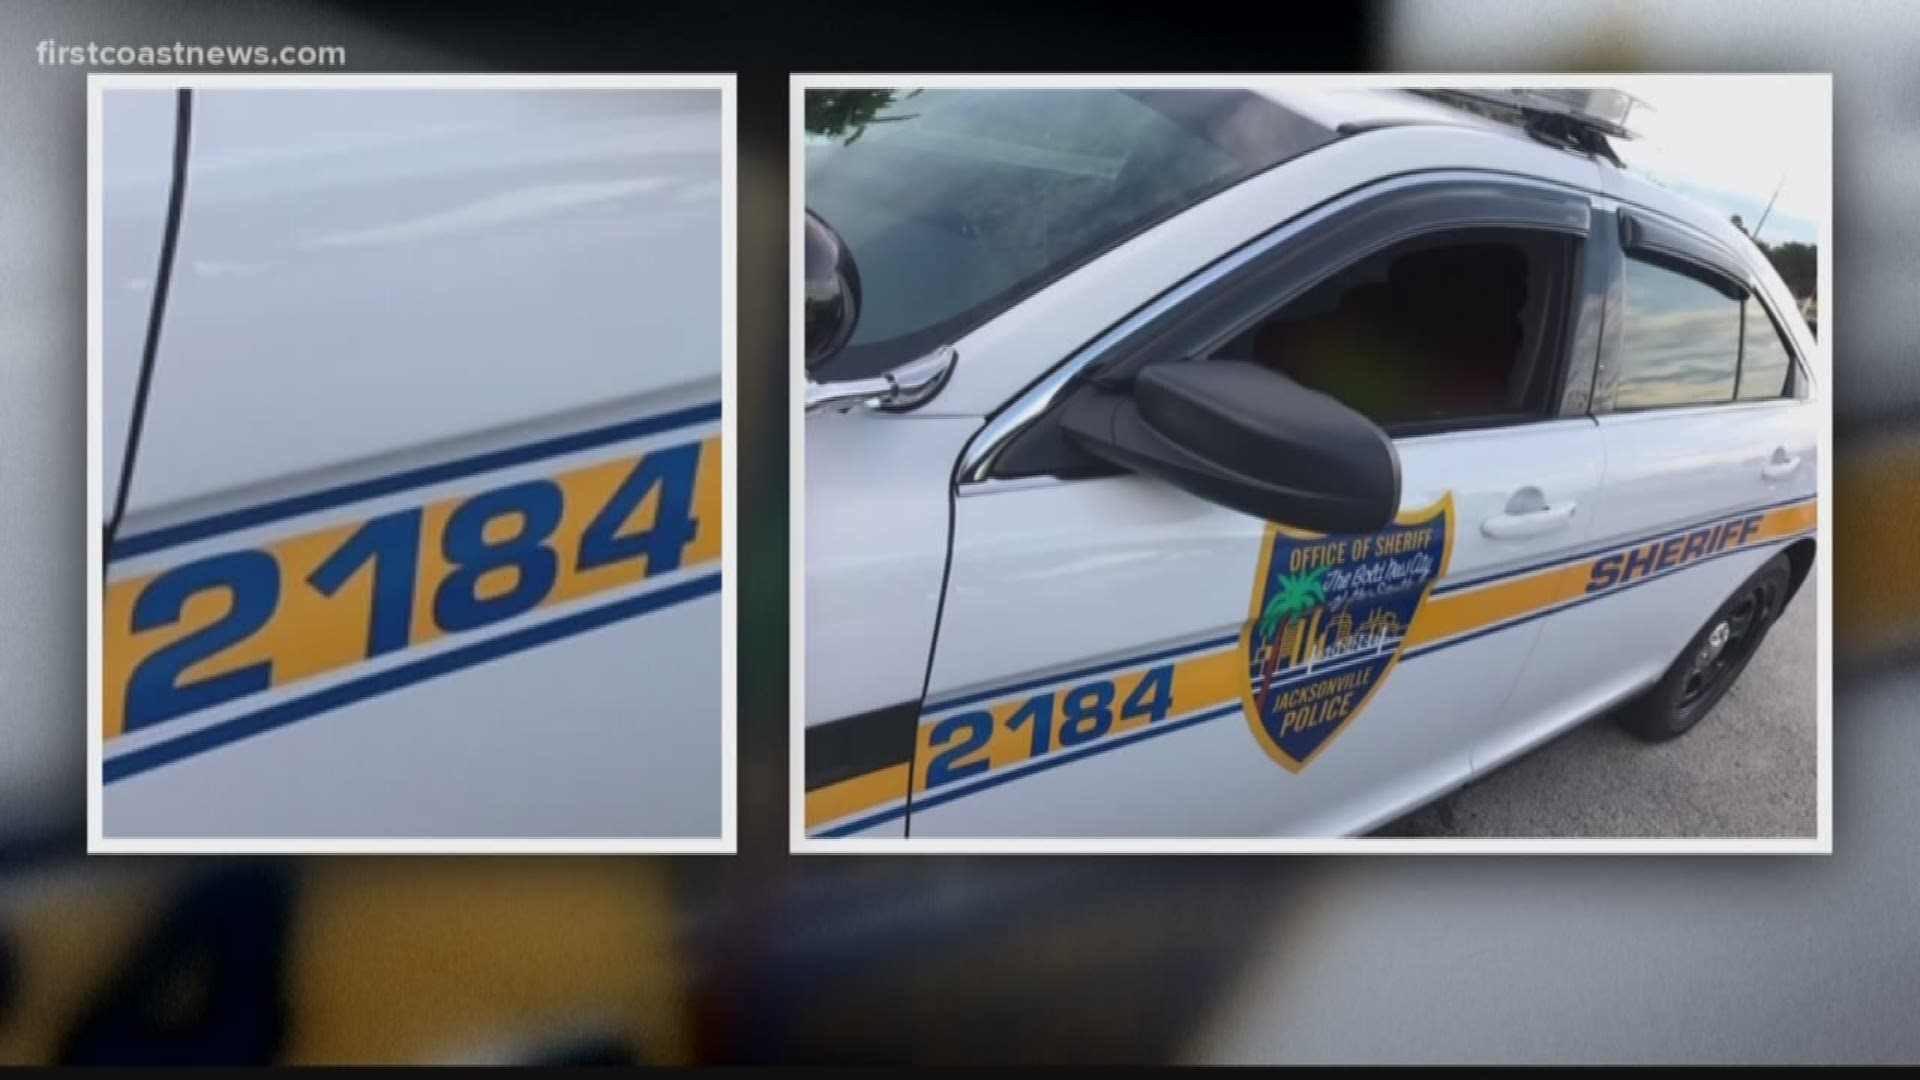 A stolen Jacksonville Sheriff's Office vehicle was found thanks to a citizen tip, according to JSO.